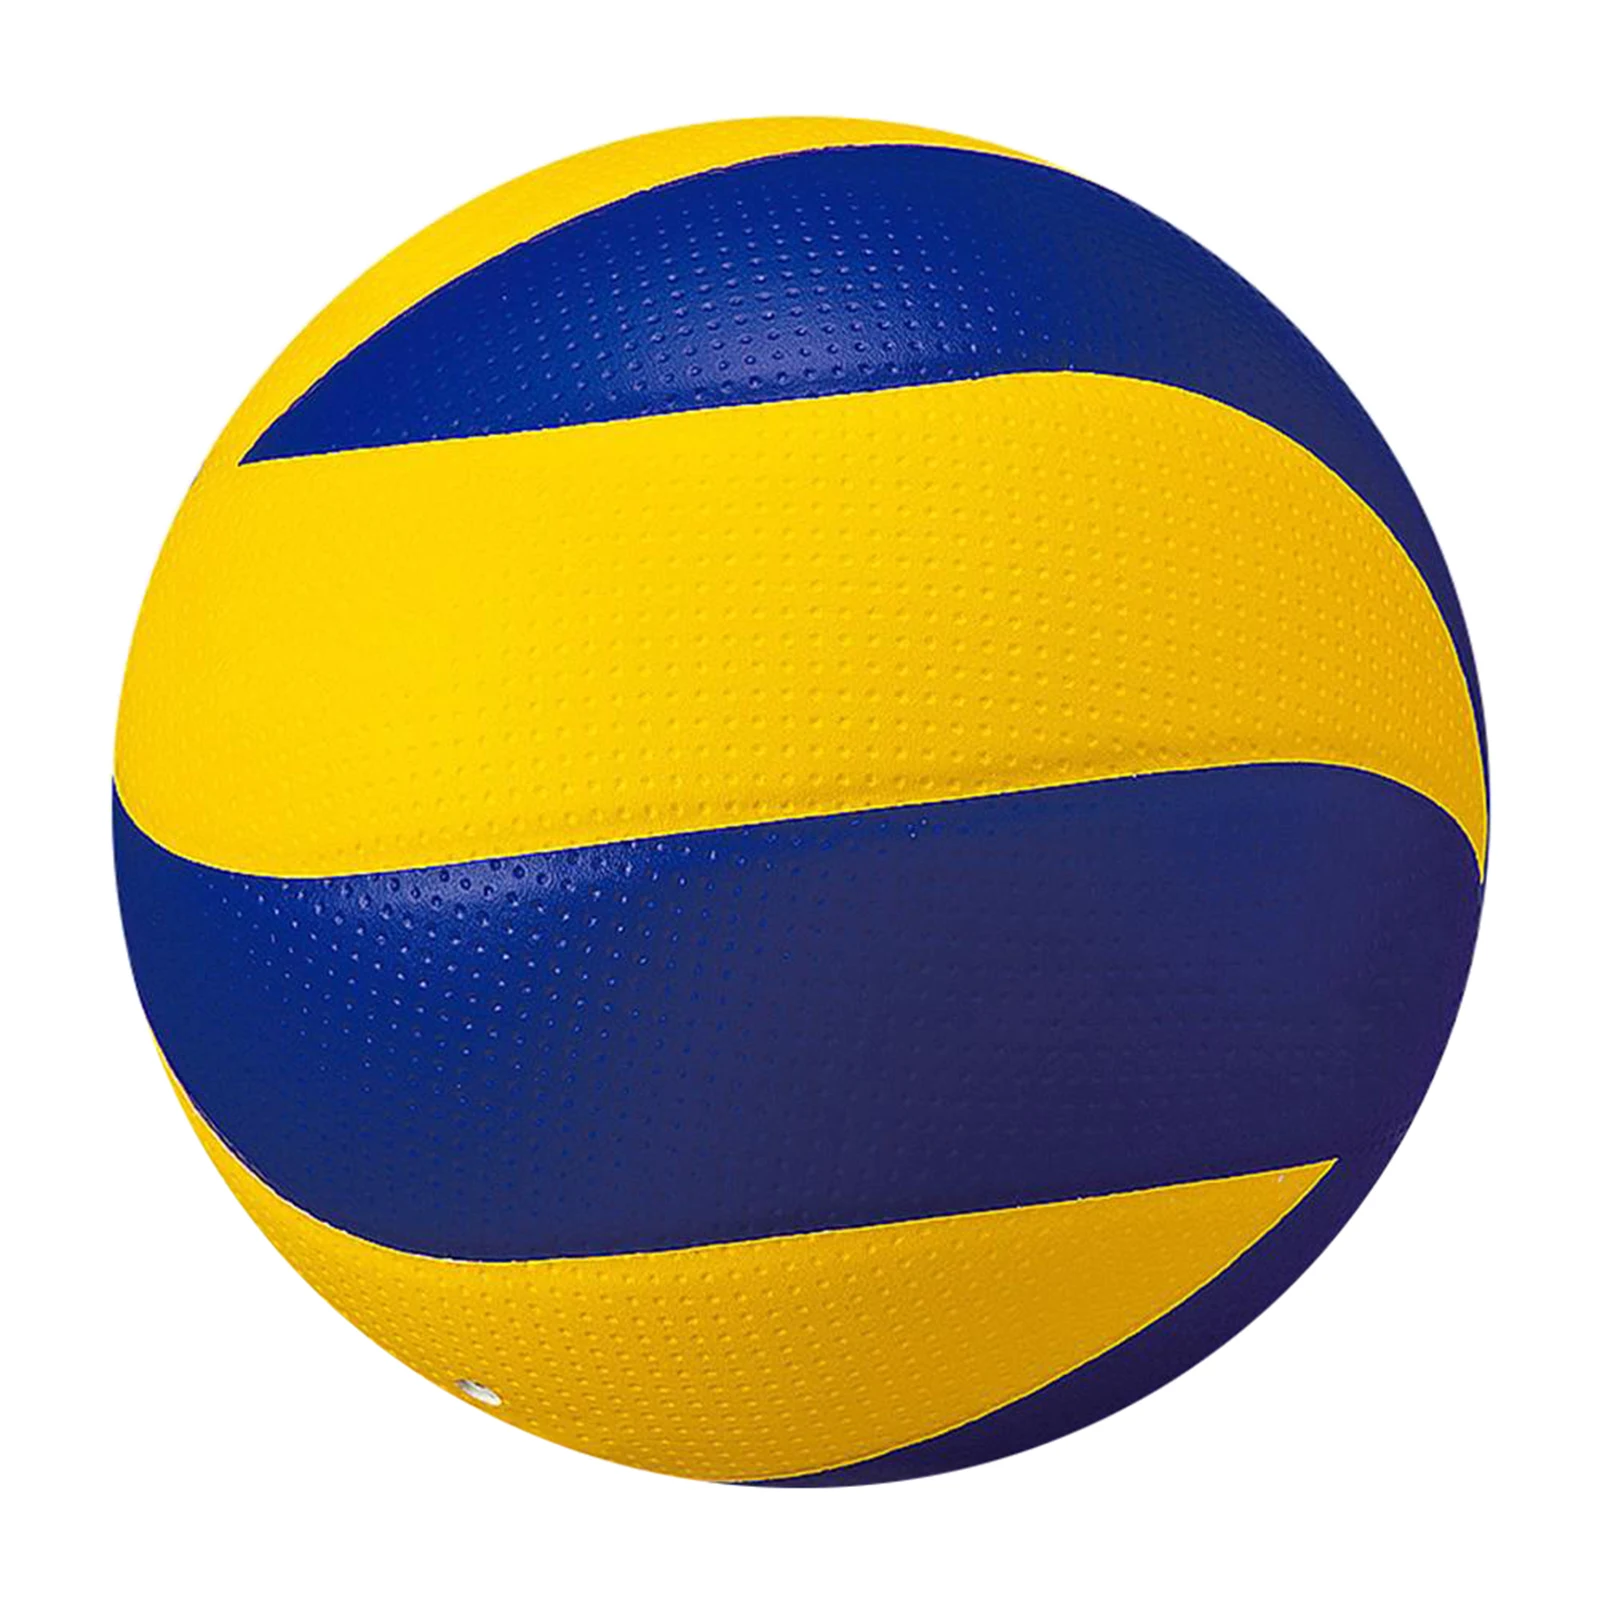 Professional Size 5 Beach Volleyball Pu Leather Ball Game Pool Training Play